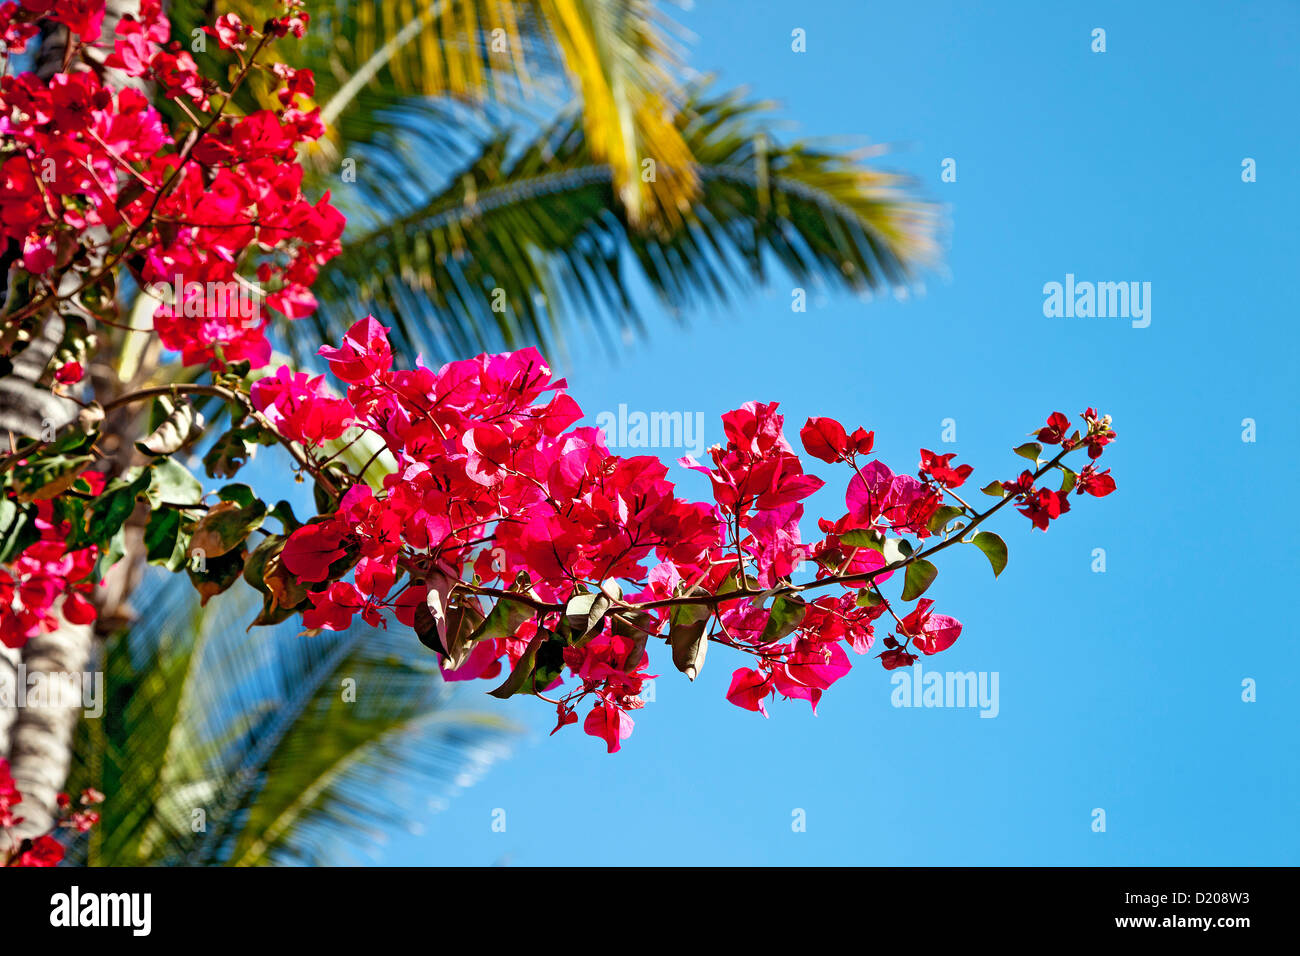 Bougainvillea with  palm tree in the background, Gran Canaria, Canary Islands, Spain Stock Photo